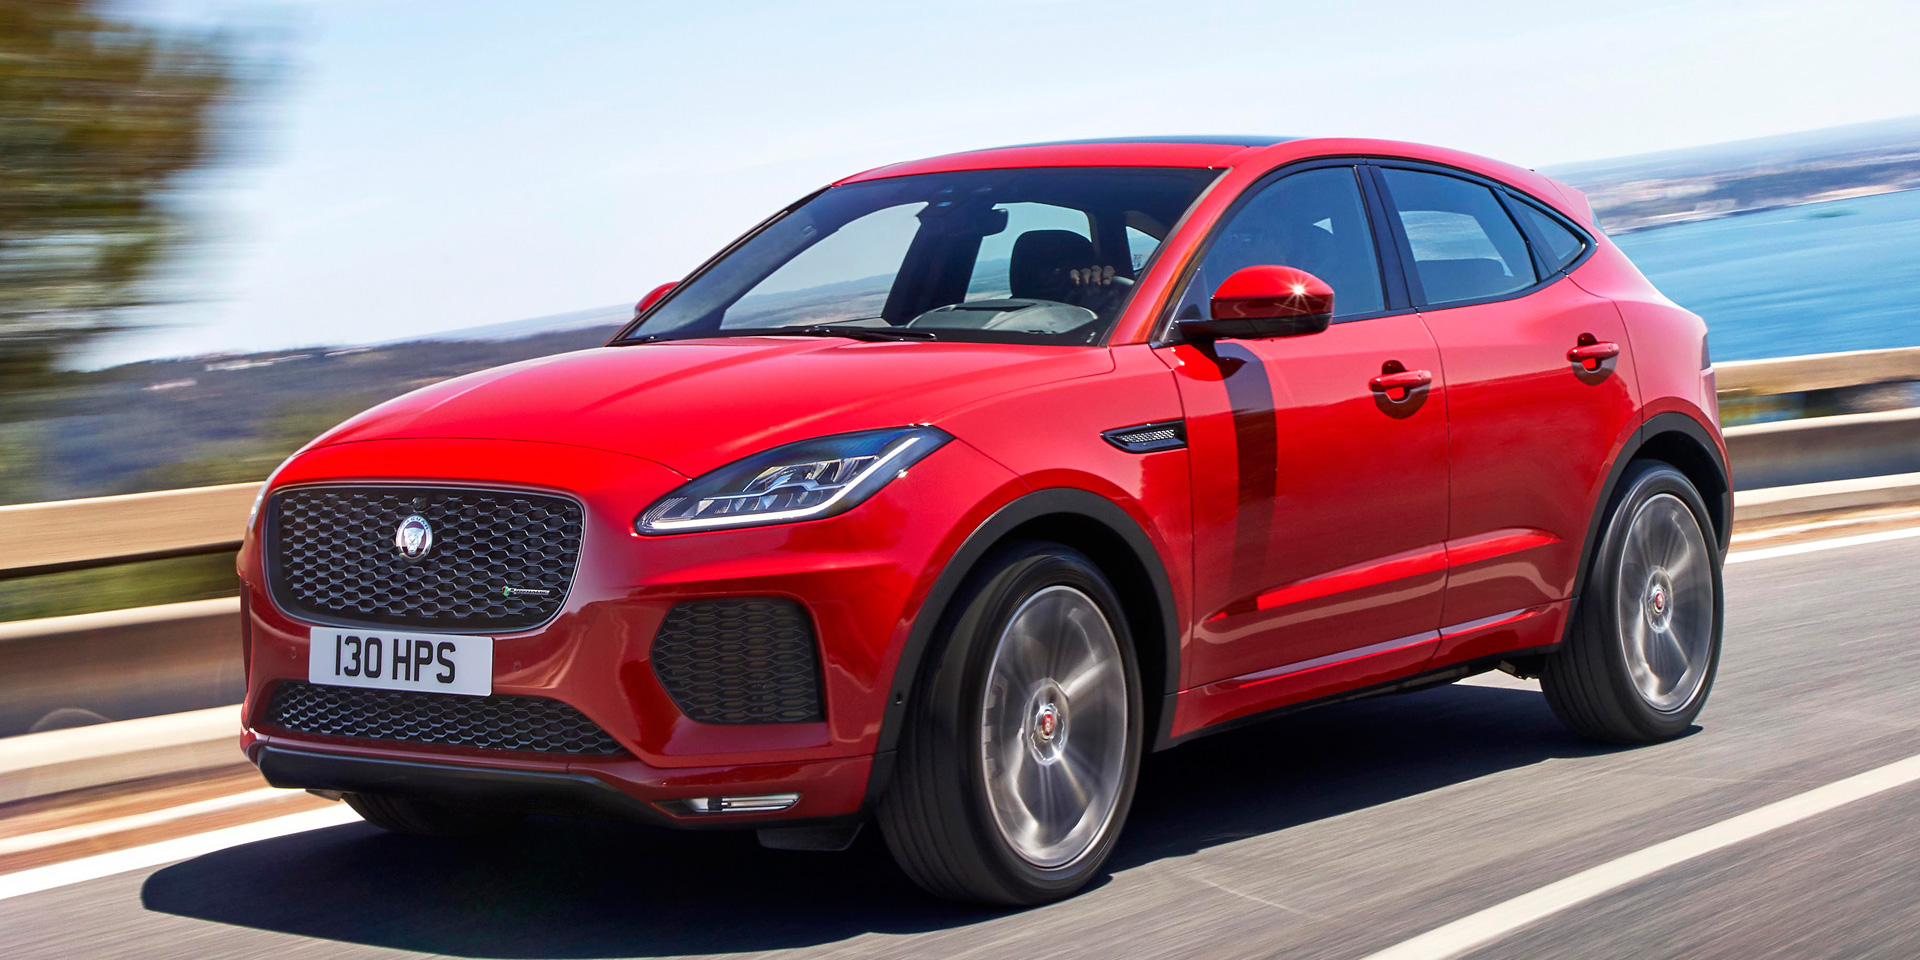 2022 Jaguar  E  Pace  Vehicles on Display Chicago 